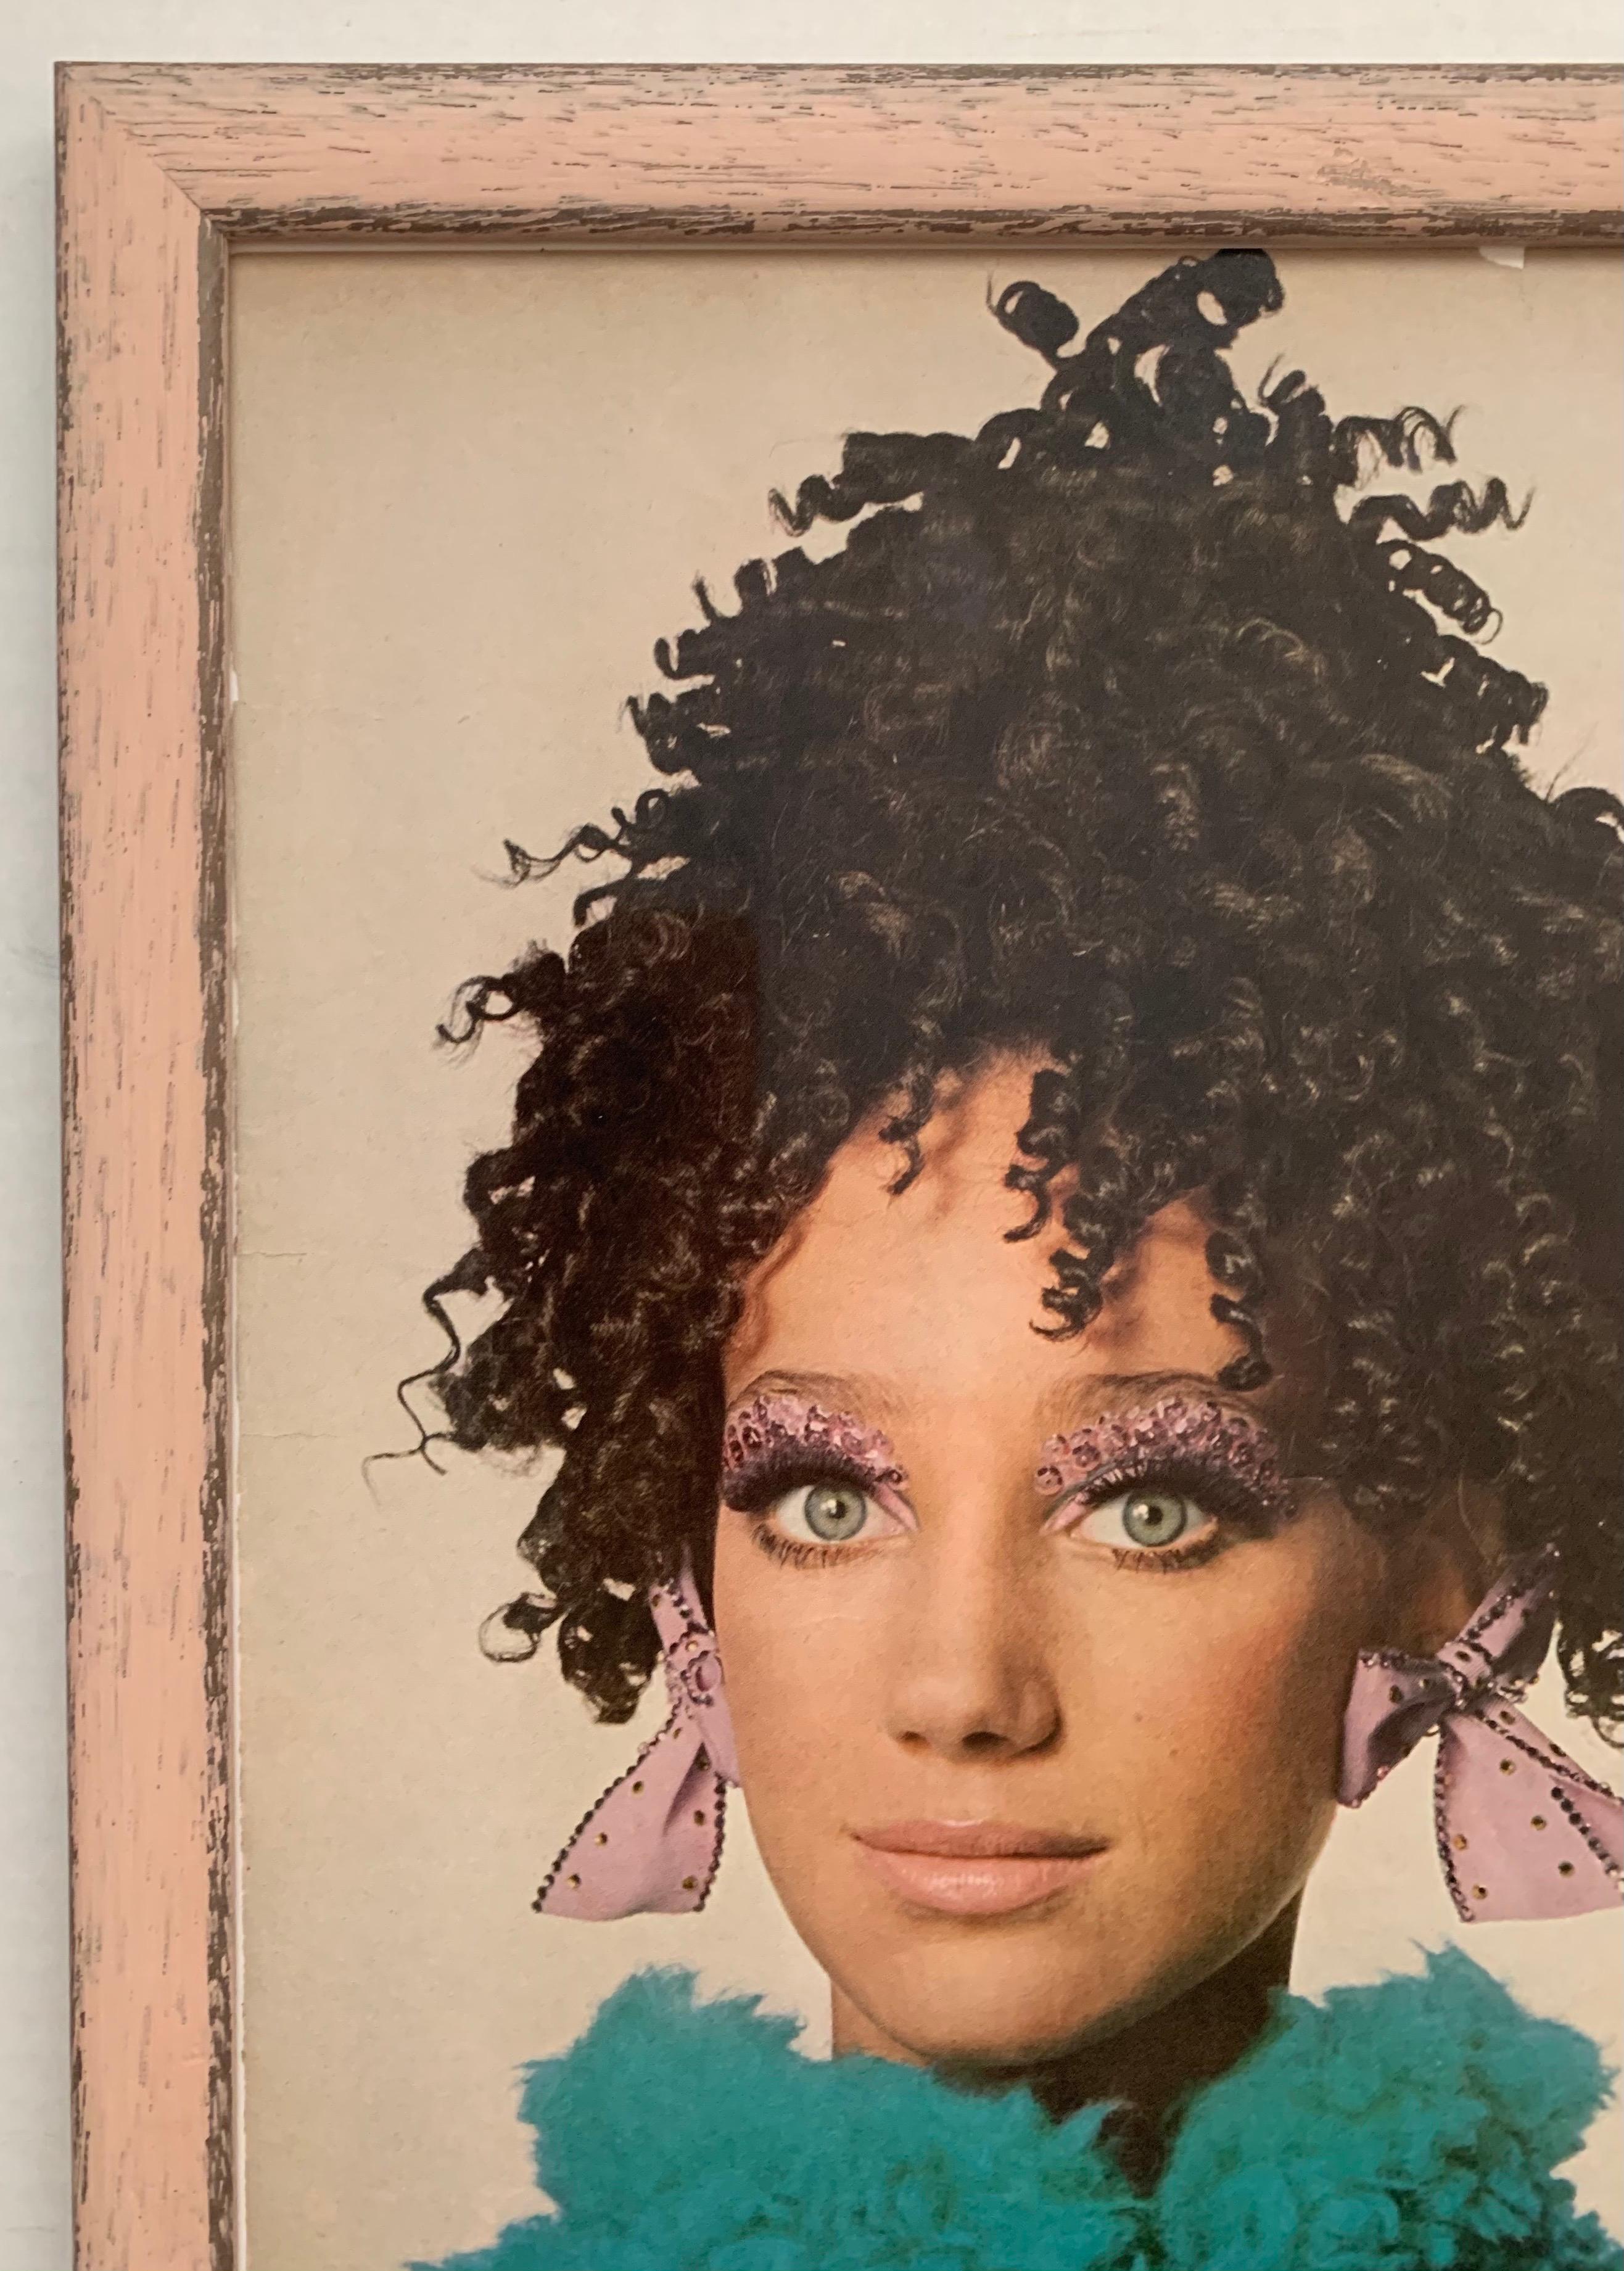 Vogue Magazine 1967 fashion editorial framed page. Marisa Berenson photographed by Irving Penn. 
As found framed condition in pink wooden frame with lightly antiqued finish. 
“Marisa Berenson is wearing a clutch of corkscrew ringlet hairpieces set